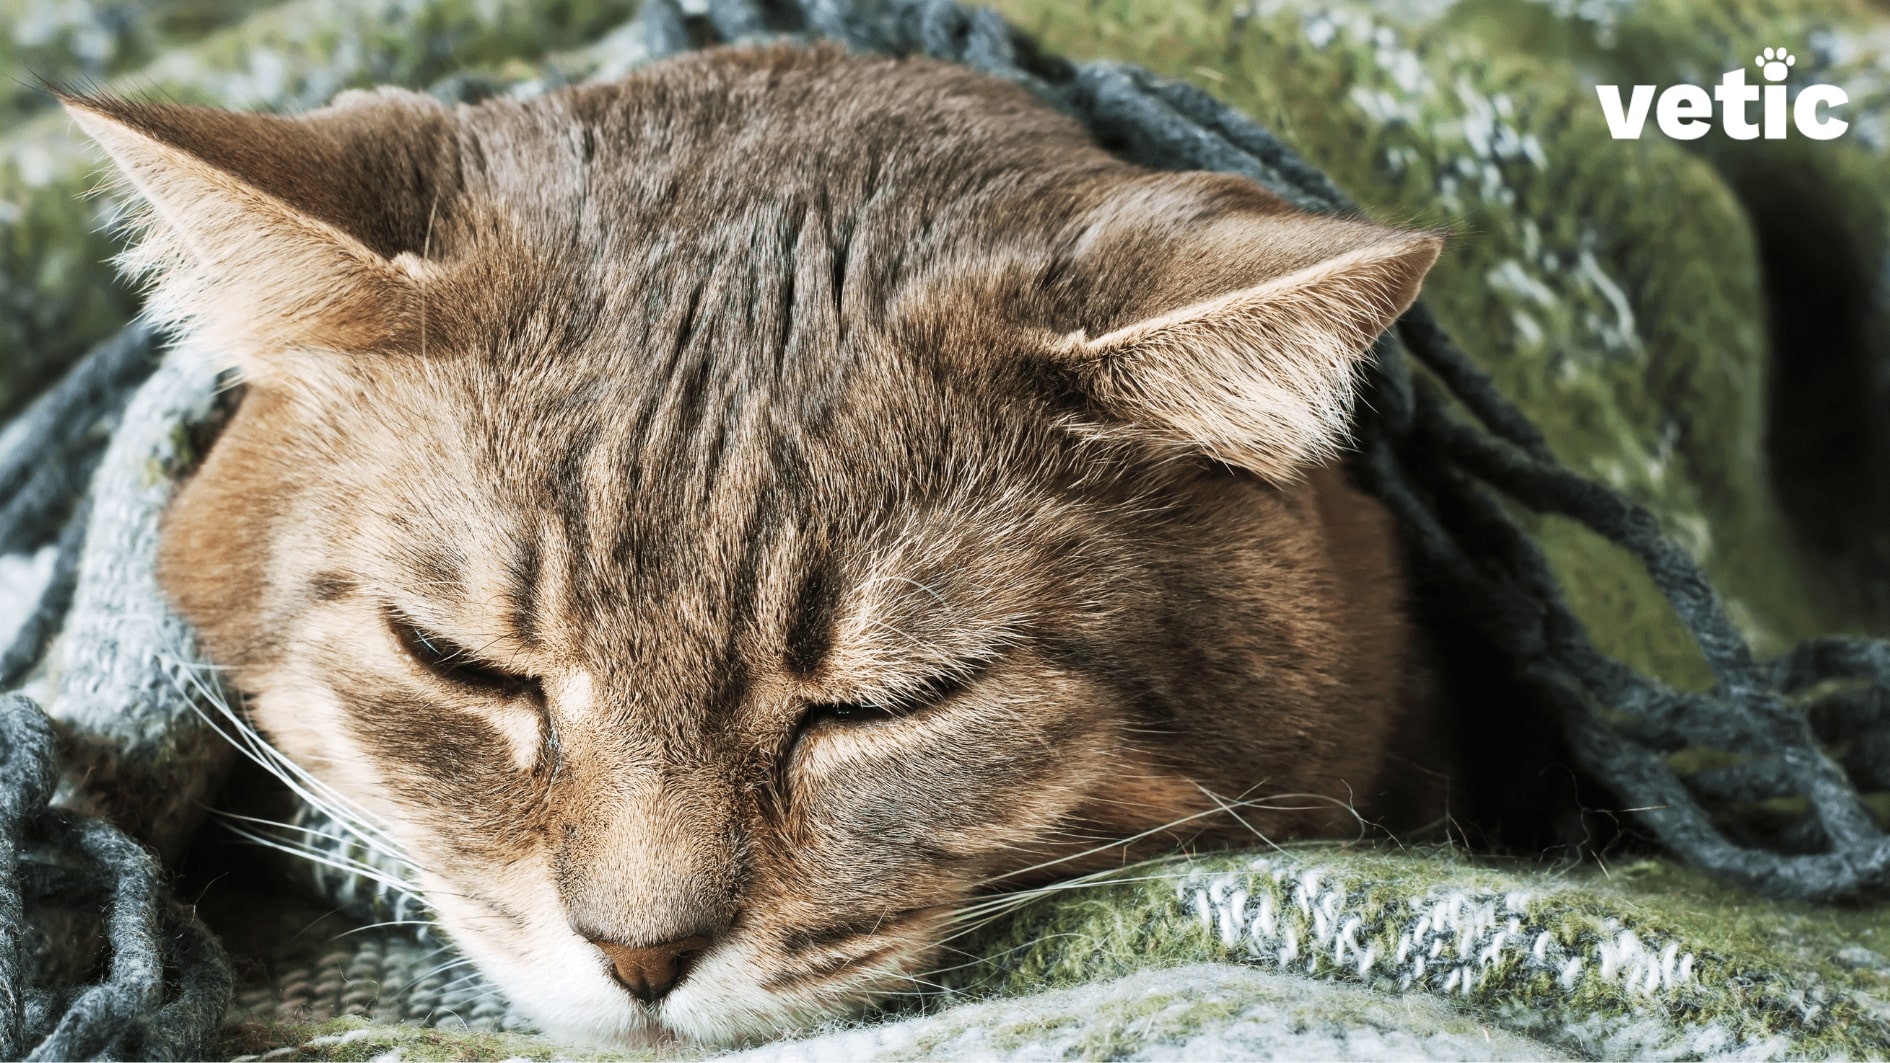 Mackerel cat sleeping under a green blanket with just head sticking out